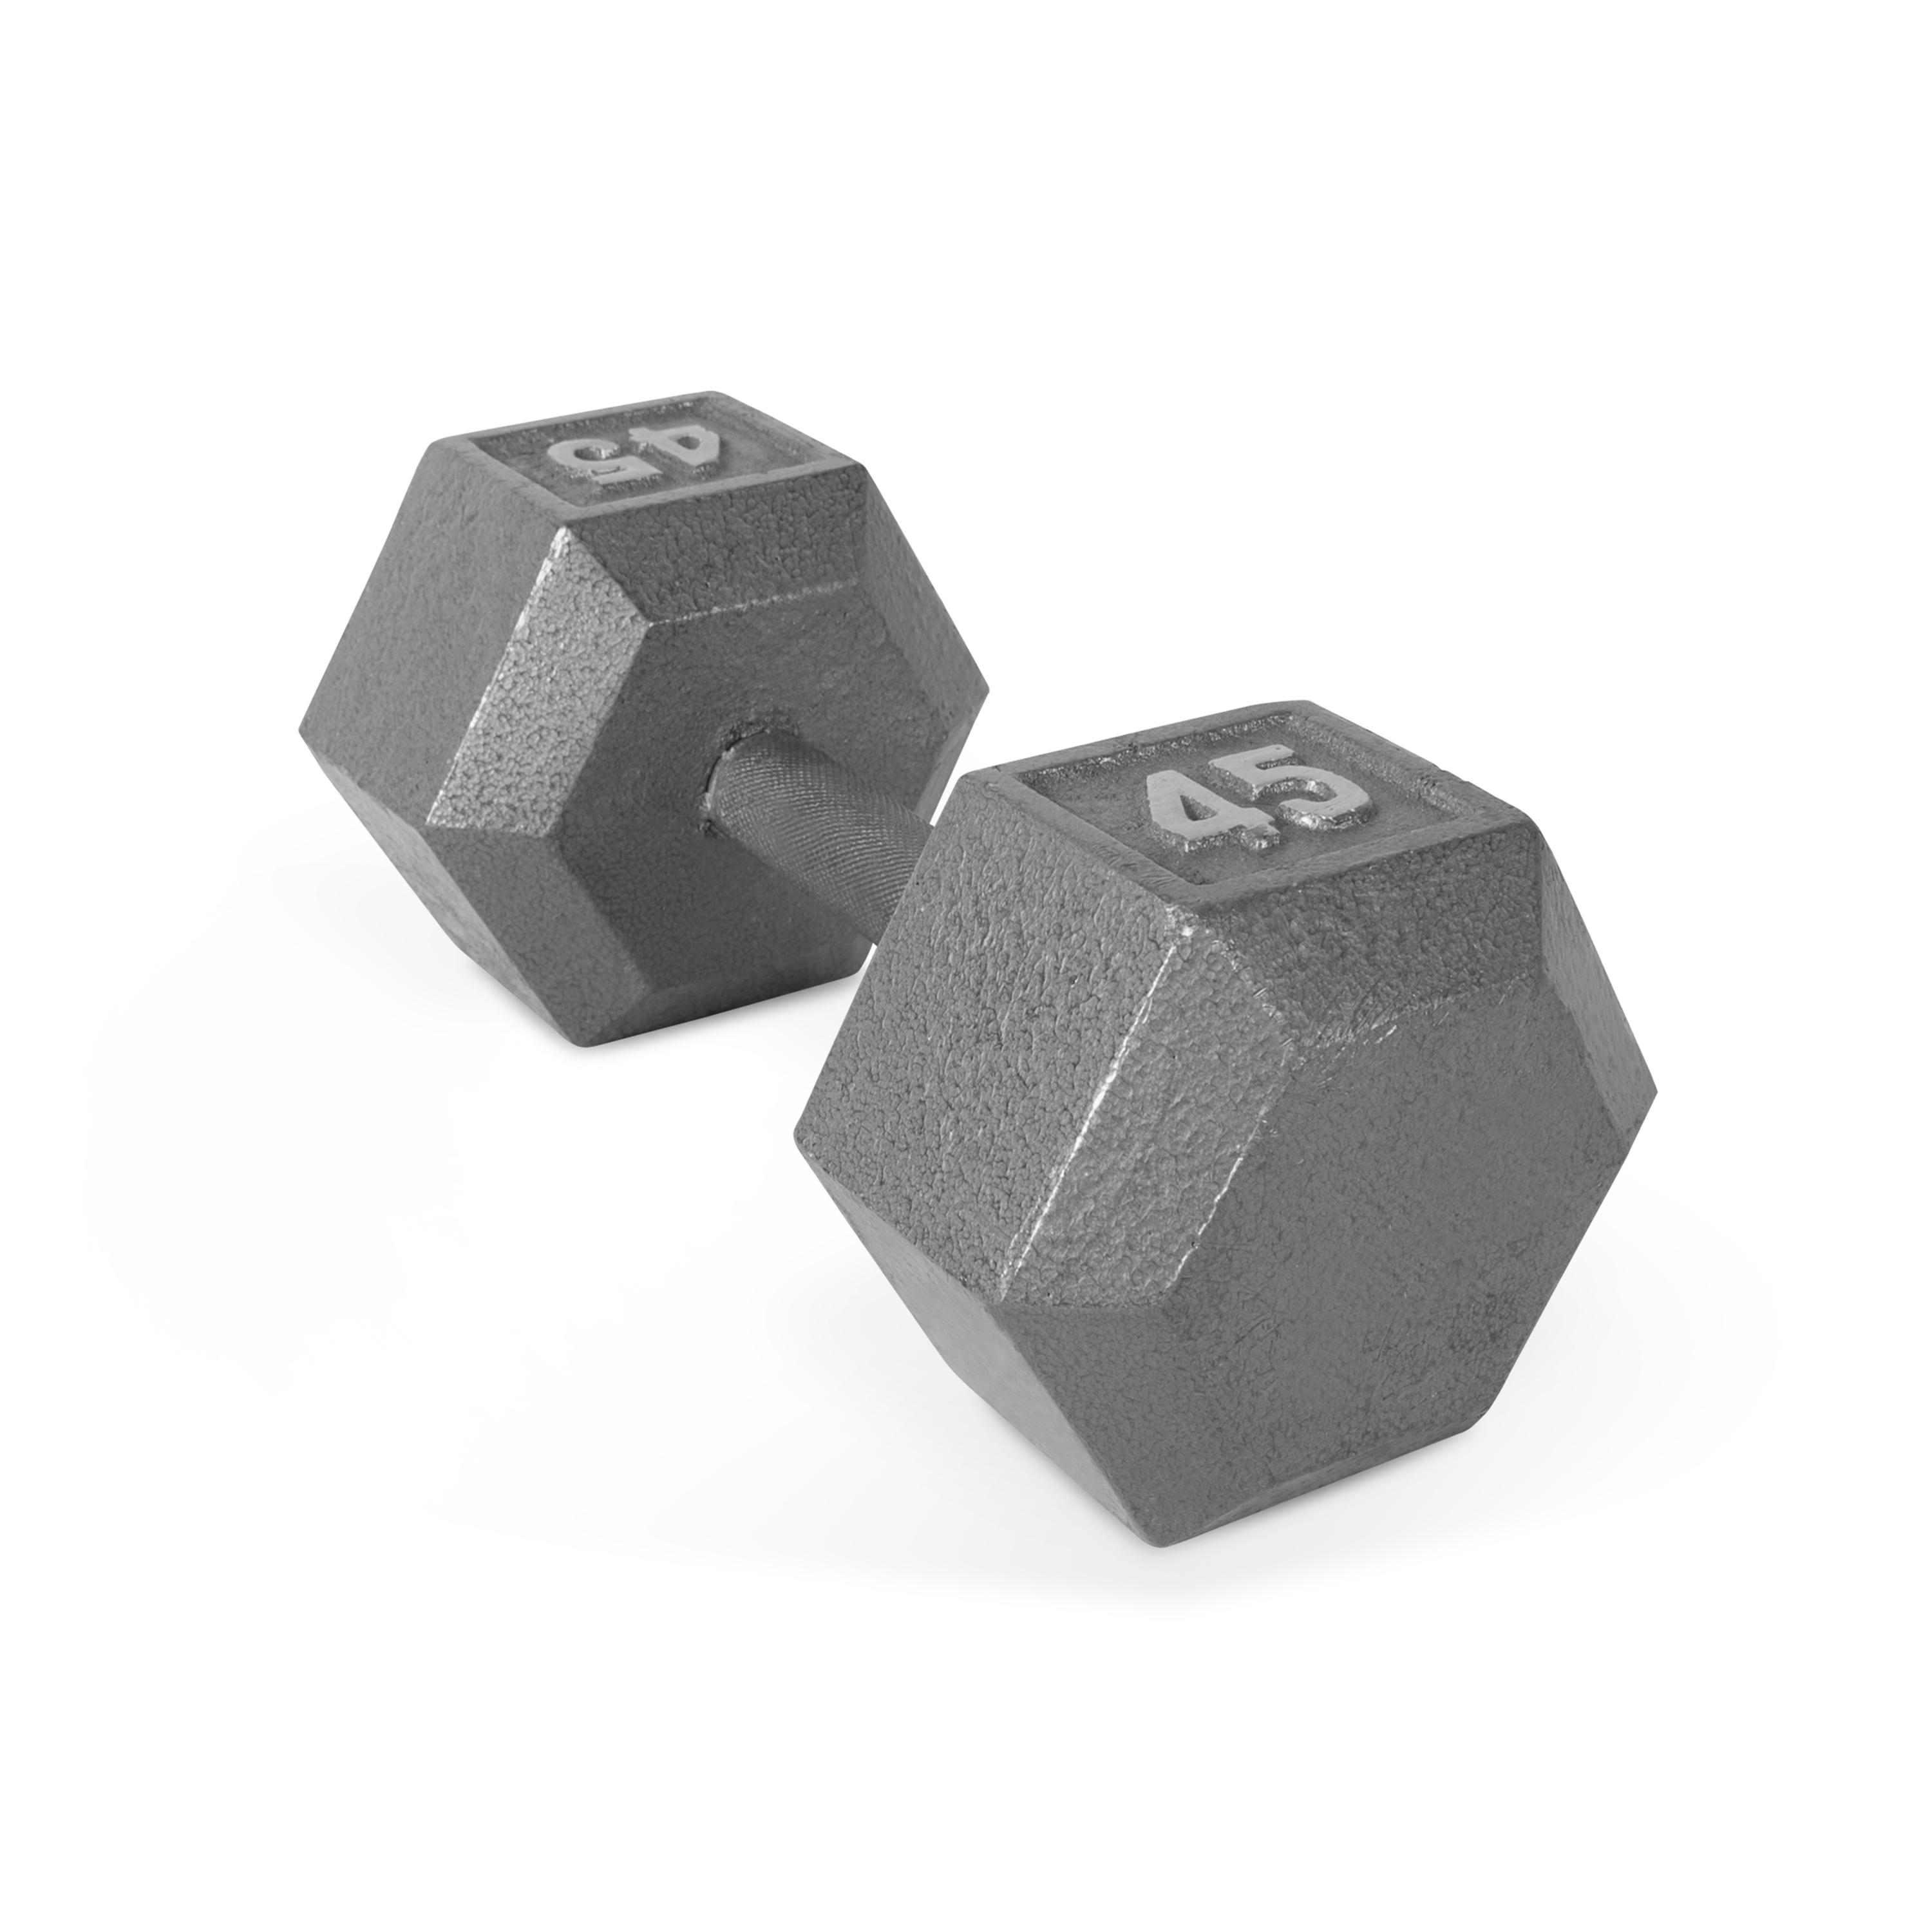 CAP Barbell 45lb Cast Iron Hex Dumbbell, Single - image 1 of 6